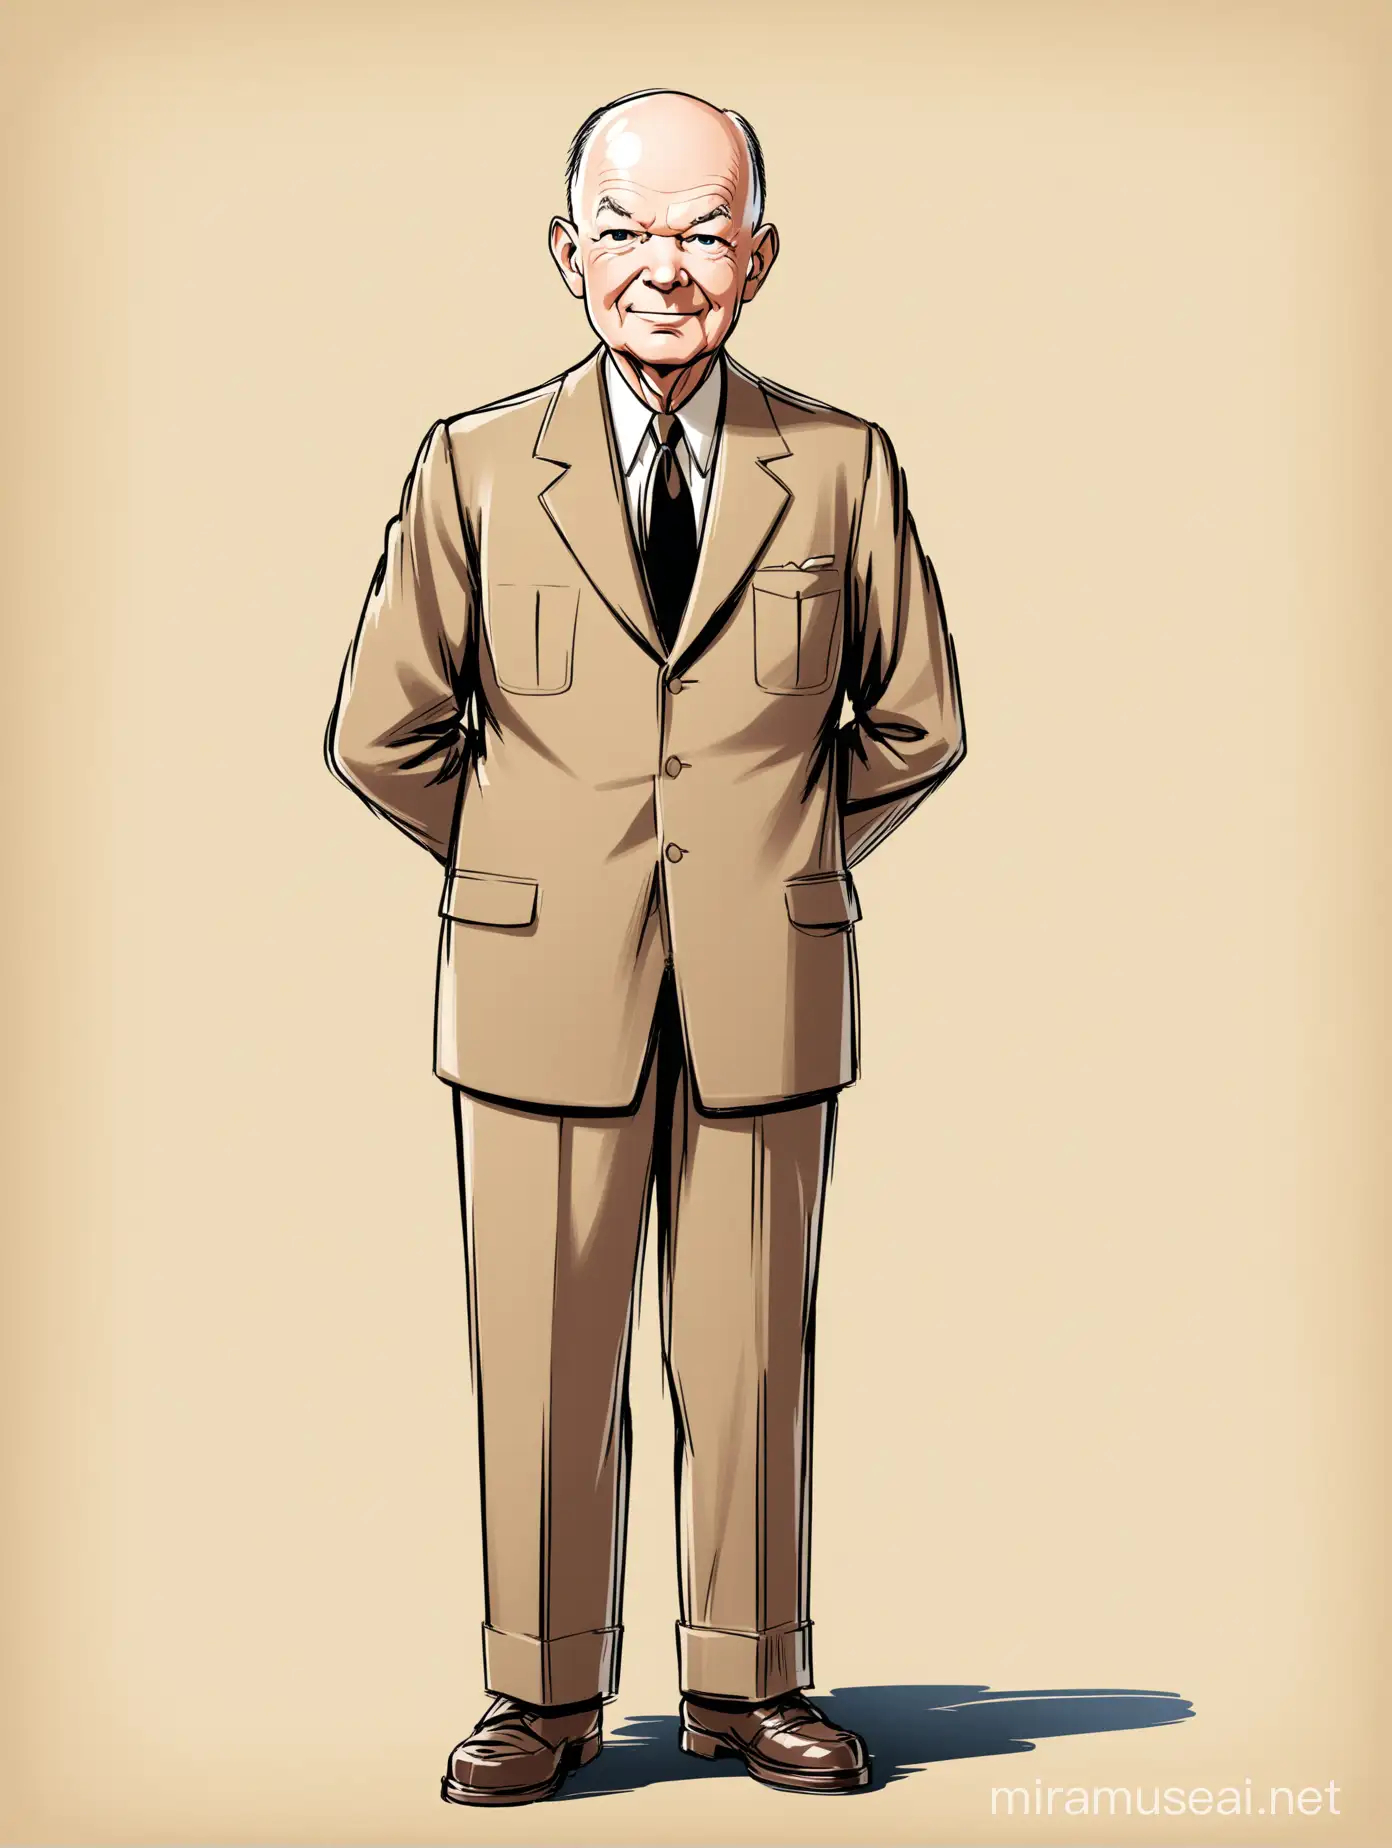 Dwight D. Eisenhower posing for a photo, standing position, full body, cartoon drawing